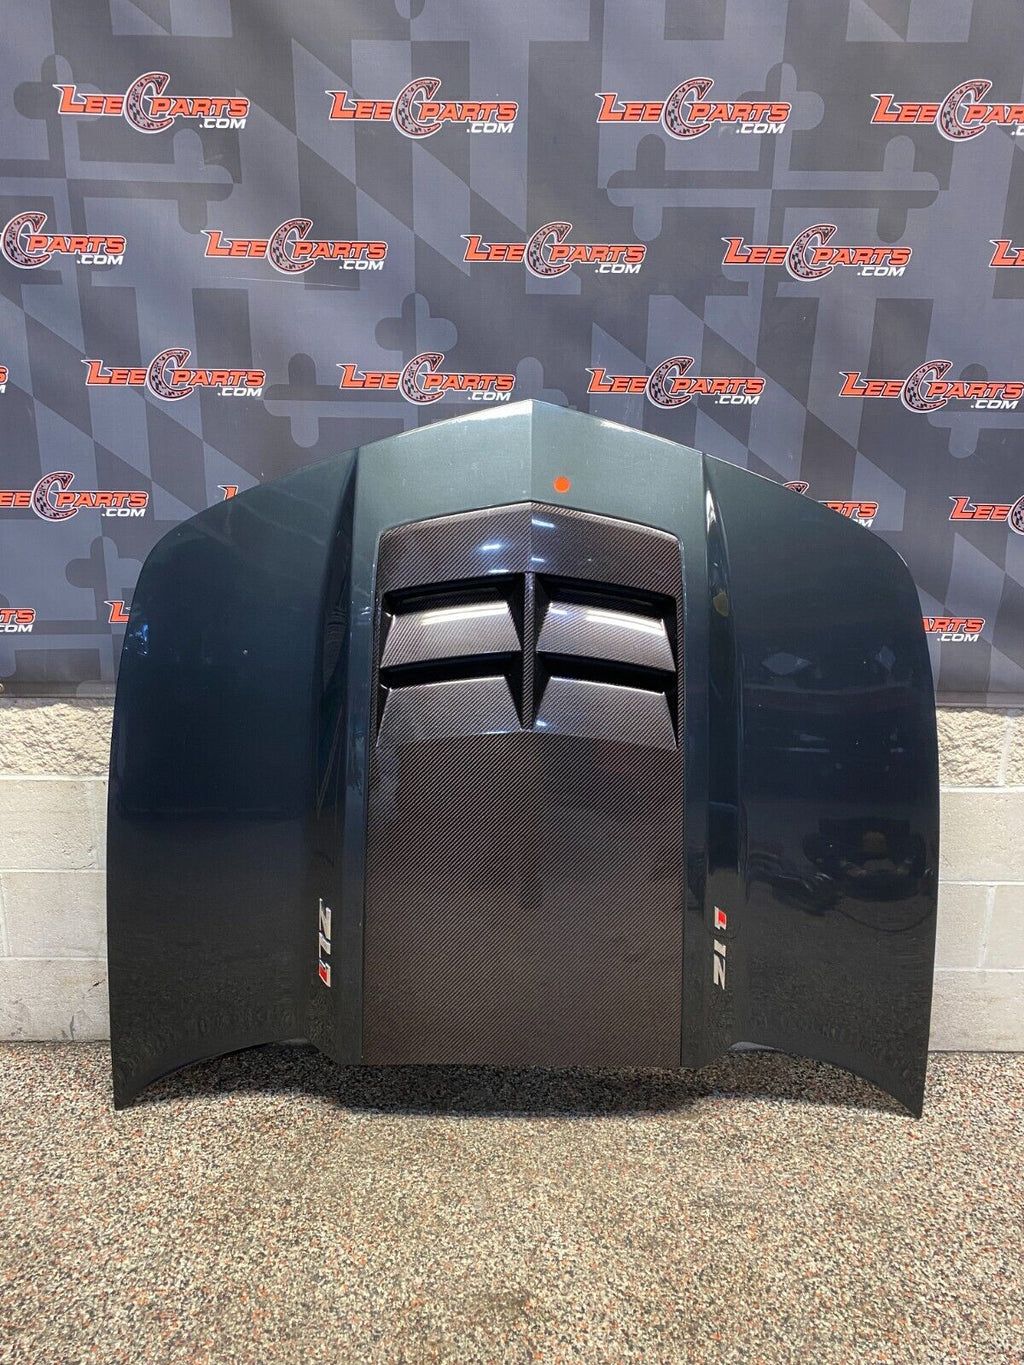 2013 CAMARO ZL1 OEM HOOD WITH CARBON FIBER VENT EXTRACTOR COMPLETE USED